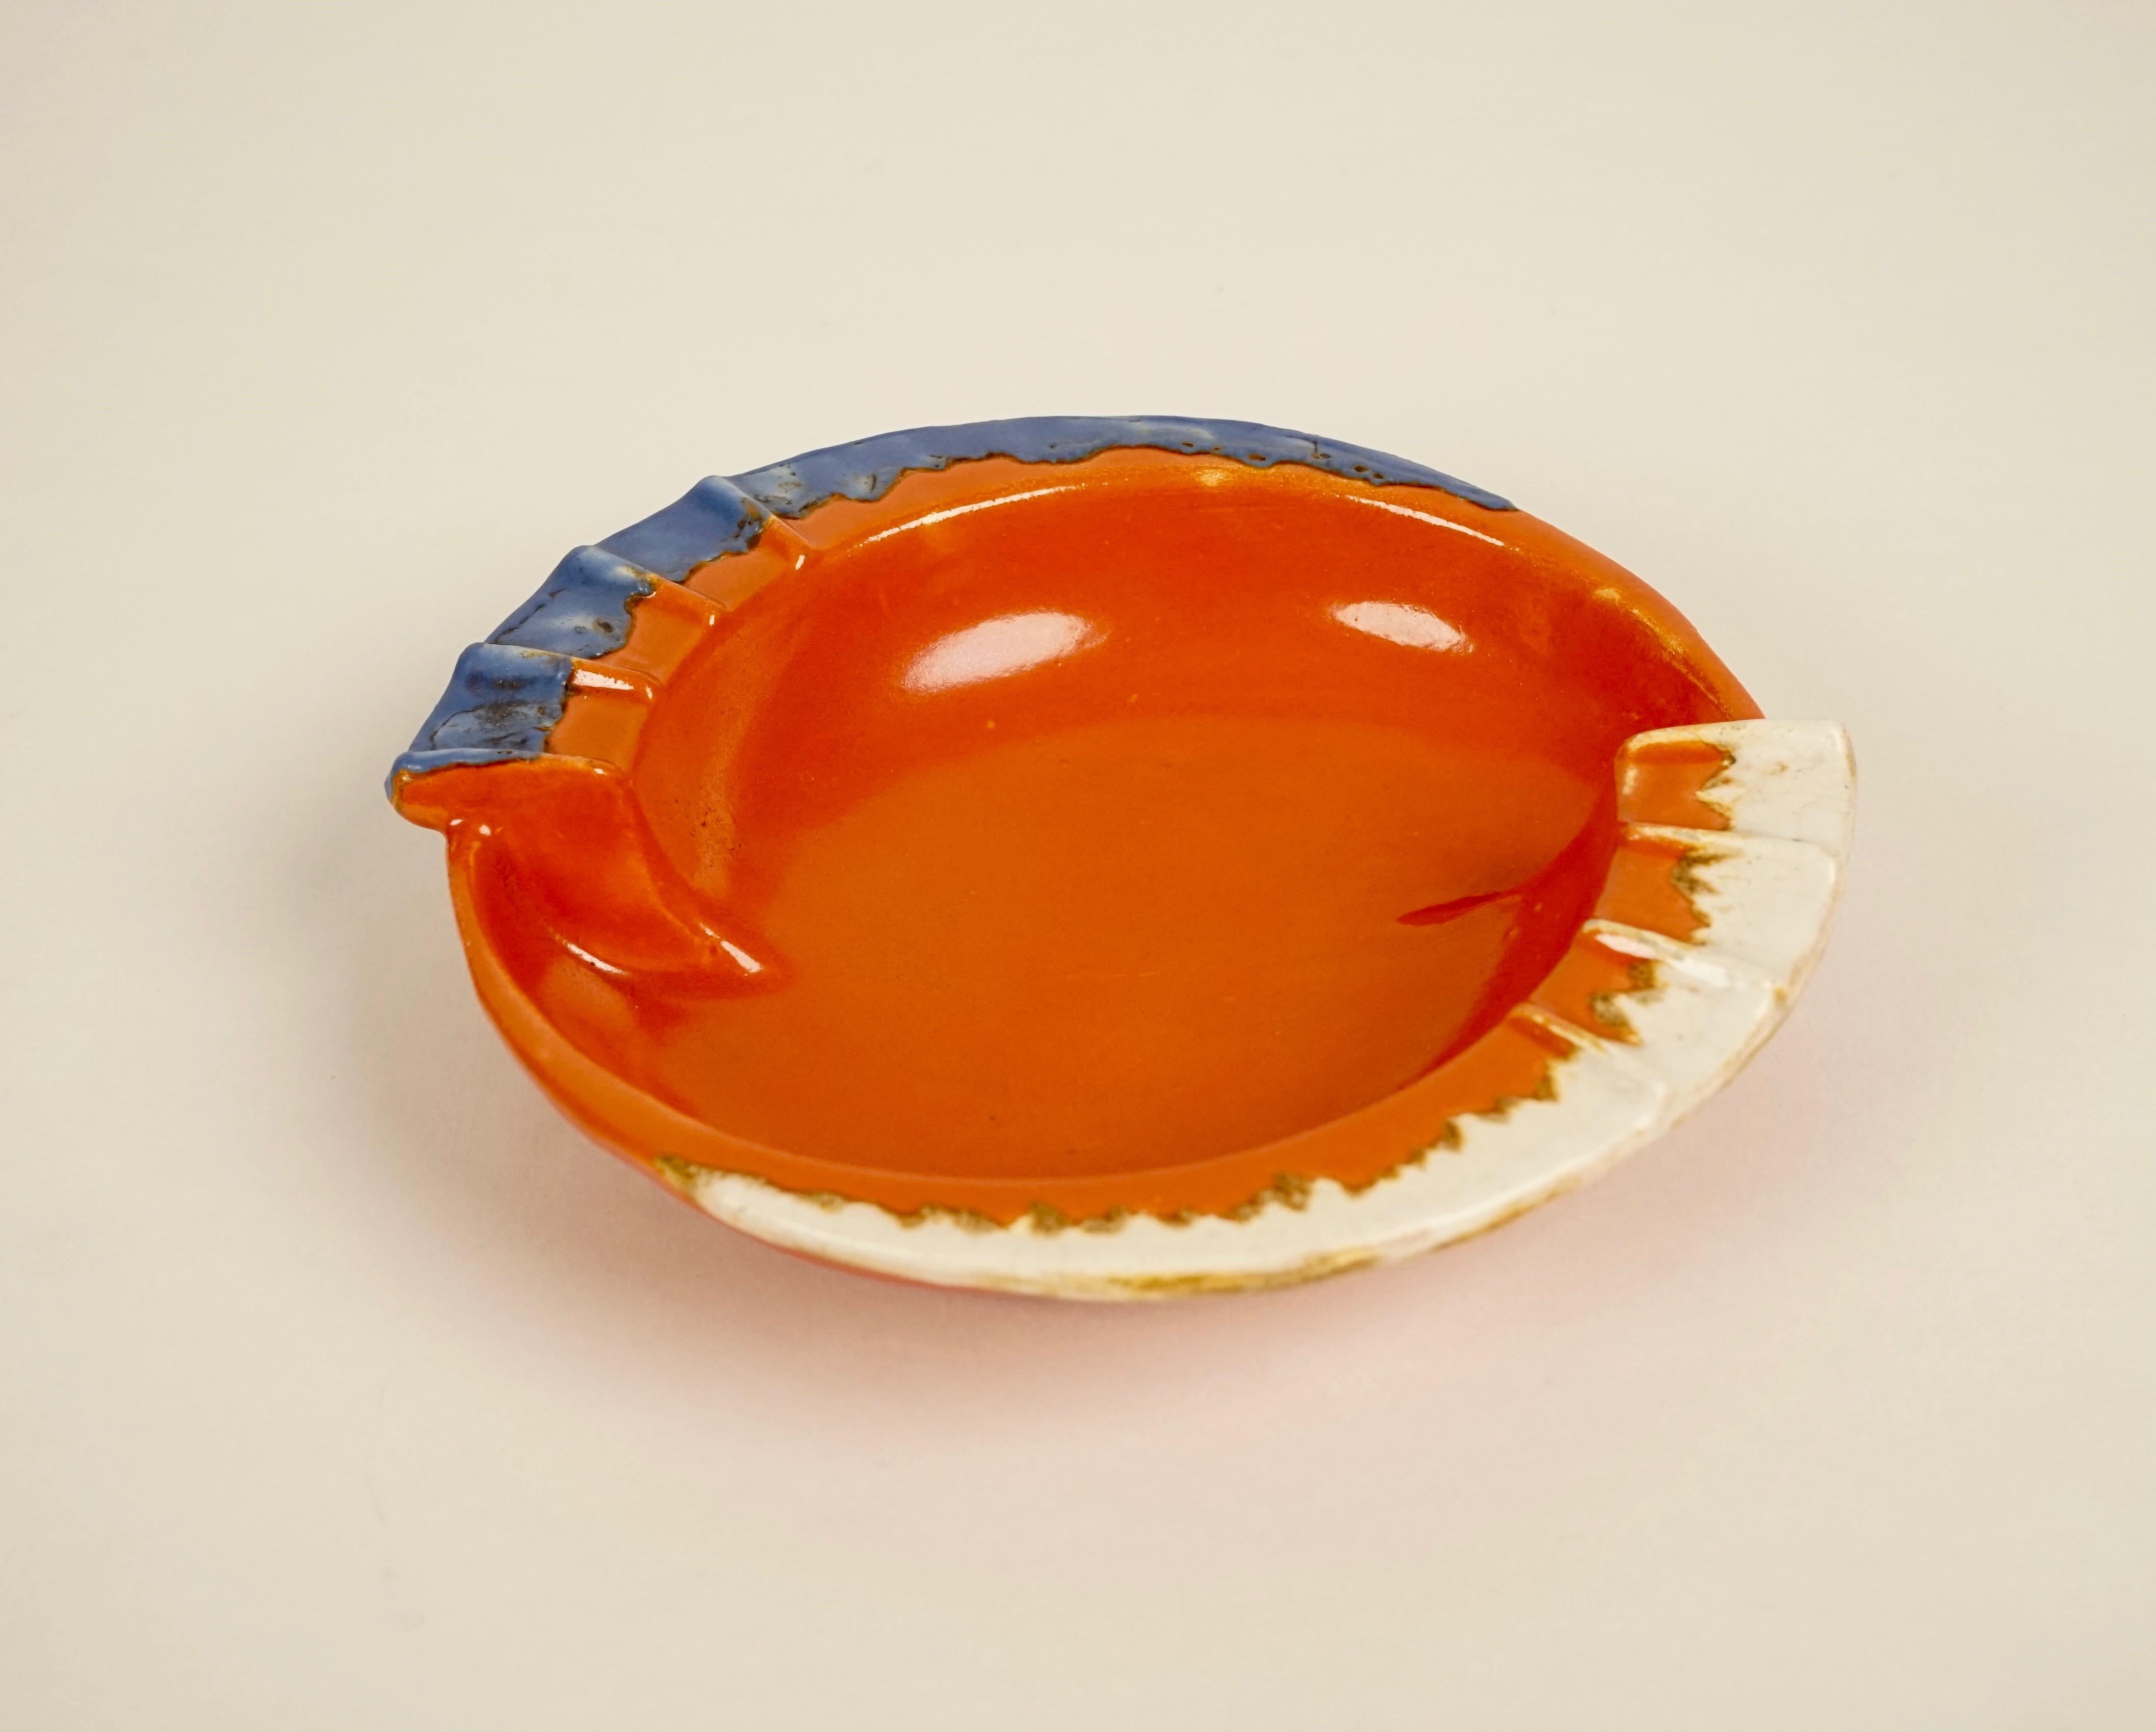 Ceramic pipe-ashtray, glazed in coral, blue and off white. Manufactured in 1930s in Czechoslovakia.
In a very good condition.